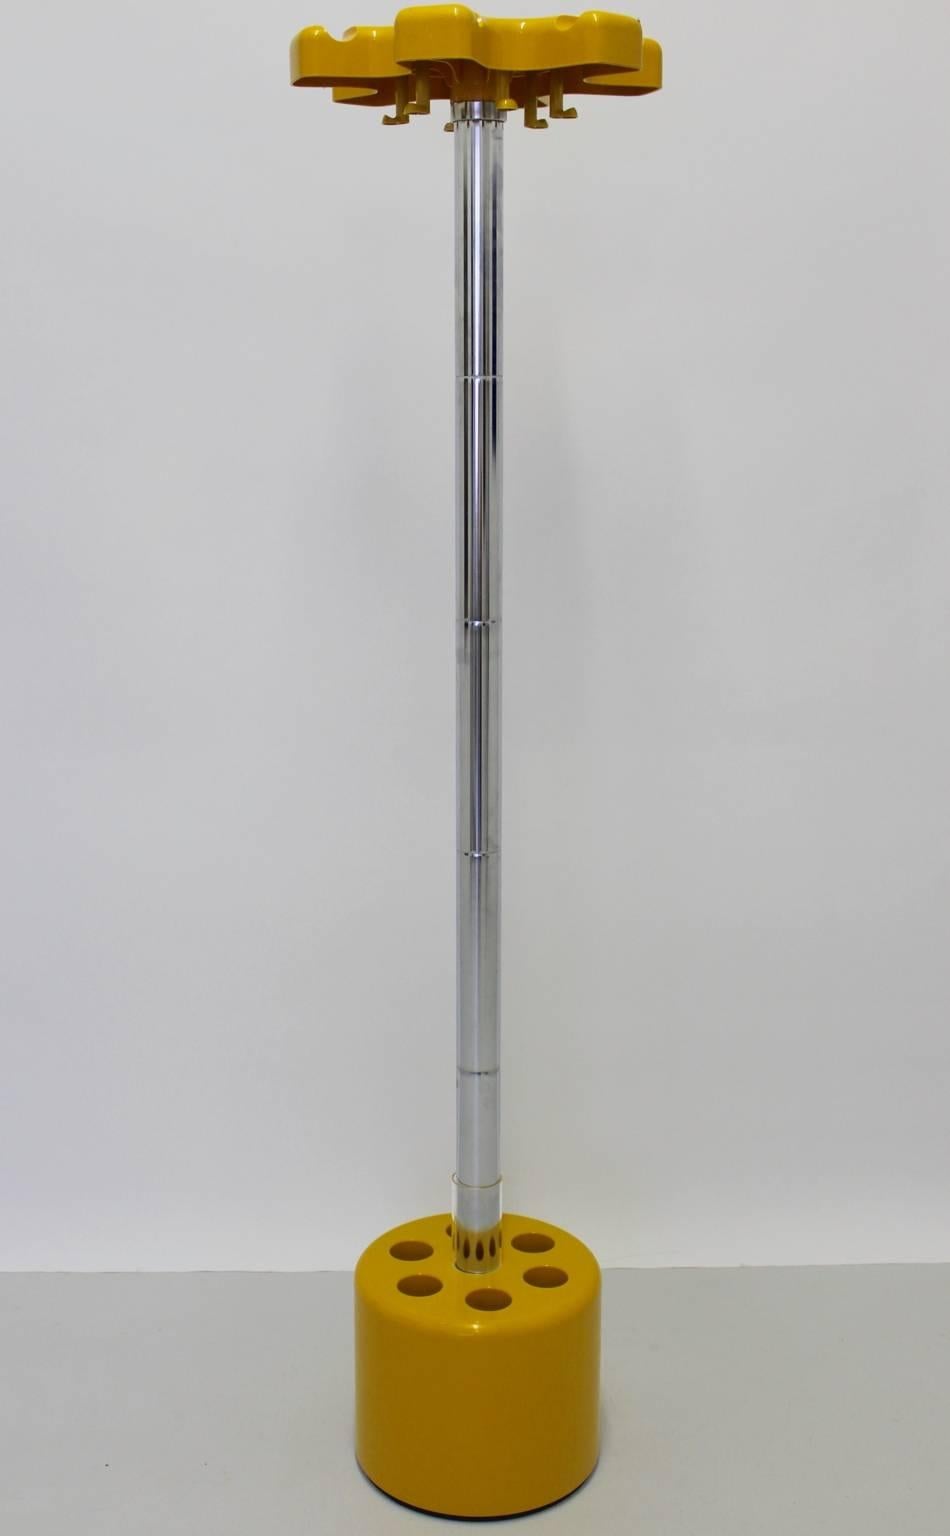 Space Age Coat Stand from chrome-plated steel and yellow plastic by Lucchi and Orlandini circa 1970, Italy.
The Designers are Roberto Lucchi and Paolo Orlandini circa 1970 and produced by Velca, Legnano, Milano.

The stem features parts, which are